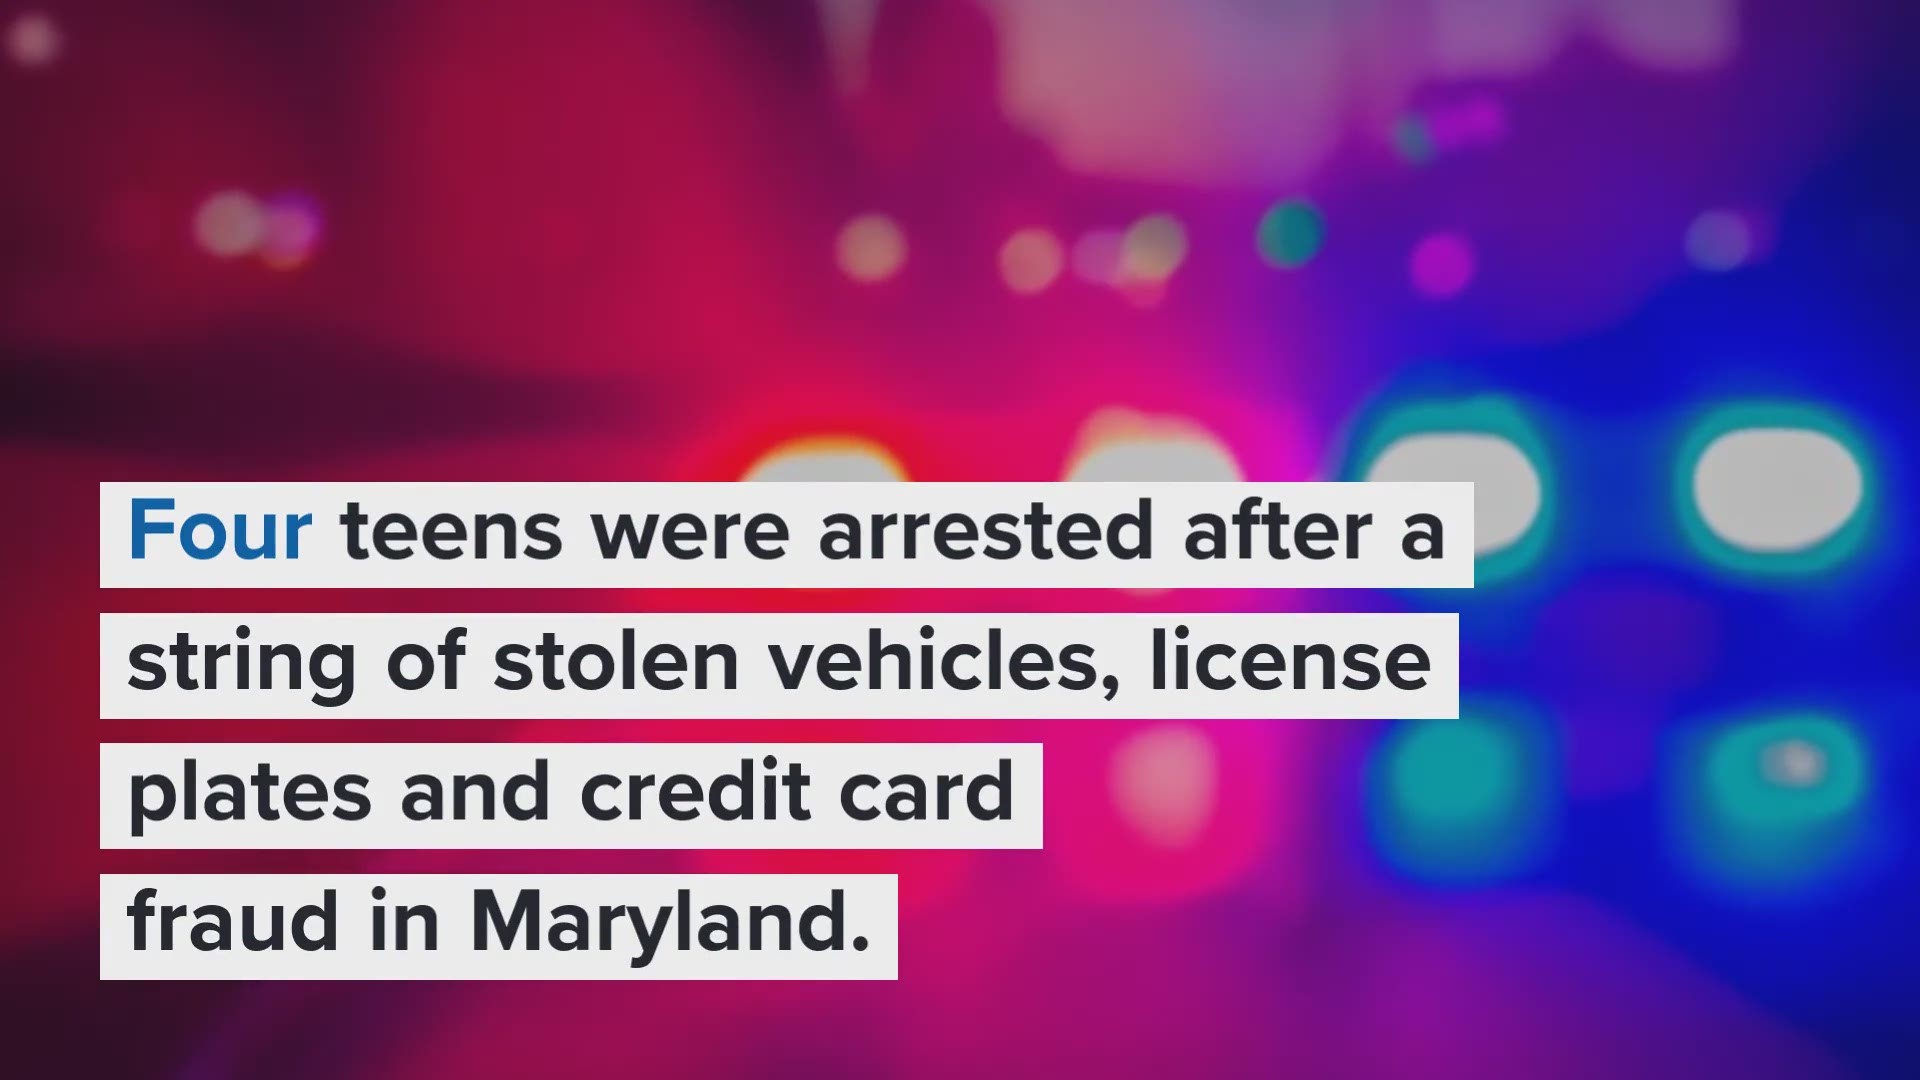 Three 13-year-olds and one 14-year-old were arrested. Police are trying to figure out whether the teens are involved in any other thefts.